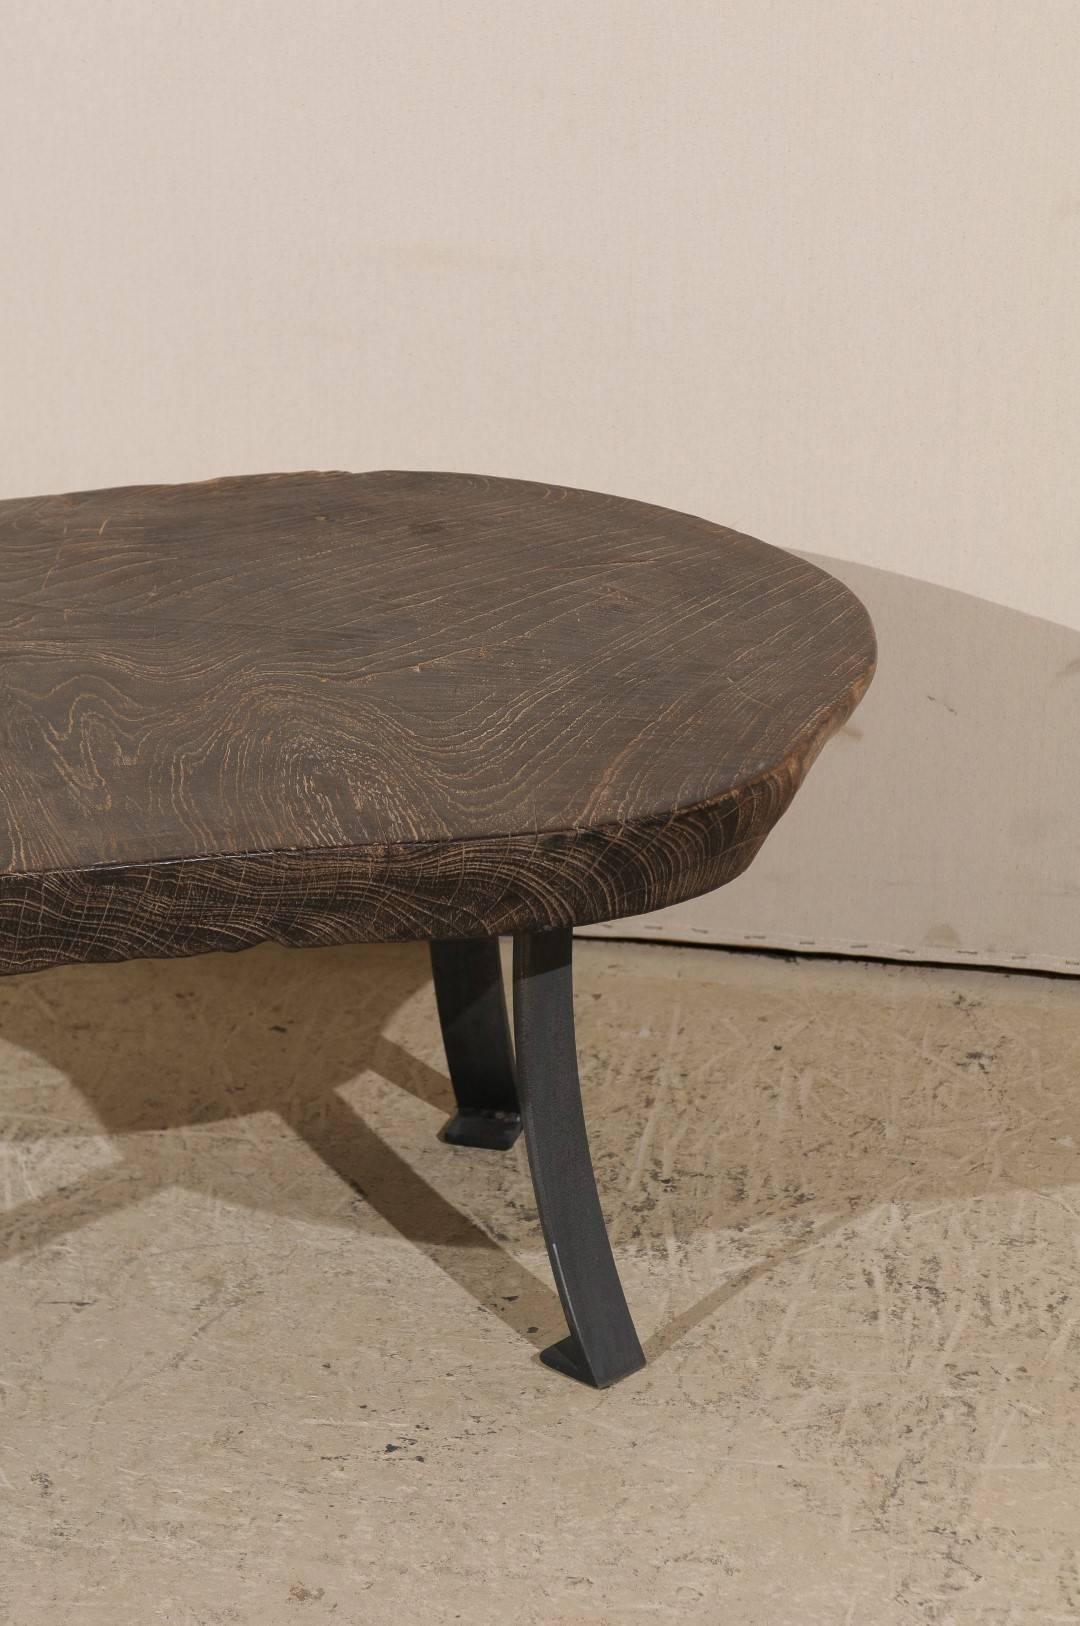 One-of-a-Kind Burned Teak Wood with Subtle Sheen Oval Shaped Table on Metal Bas 1